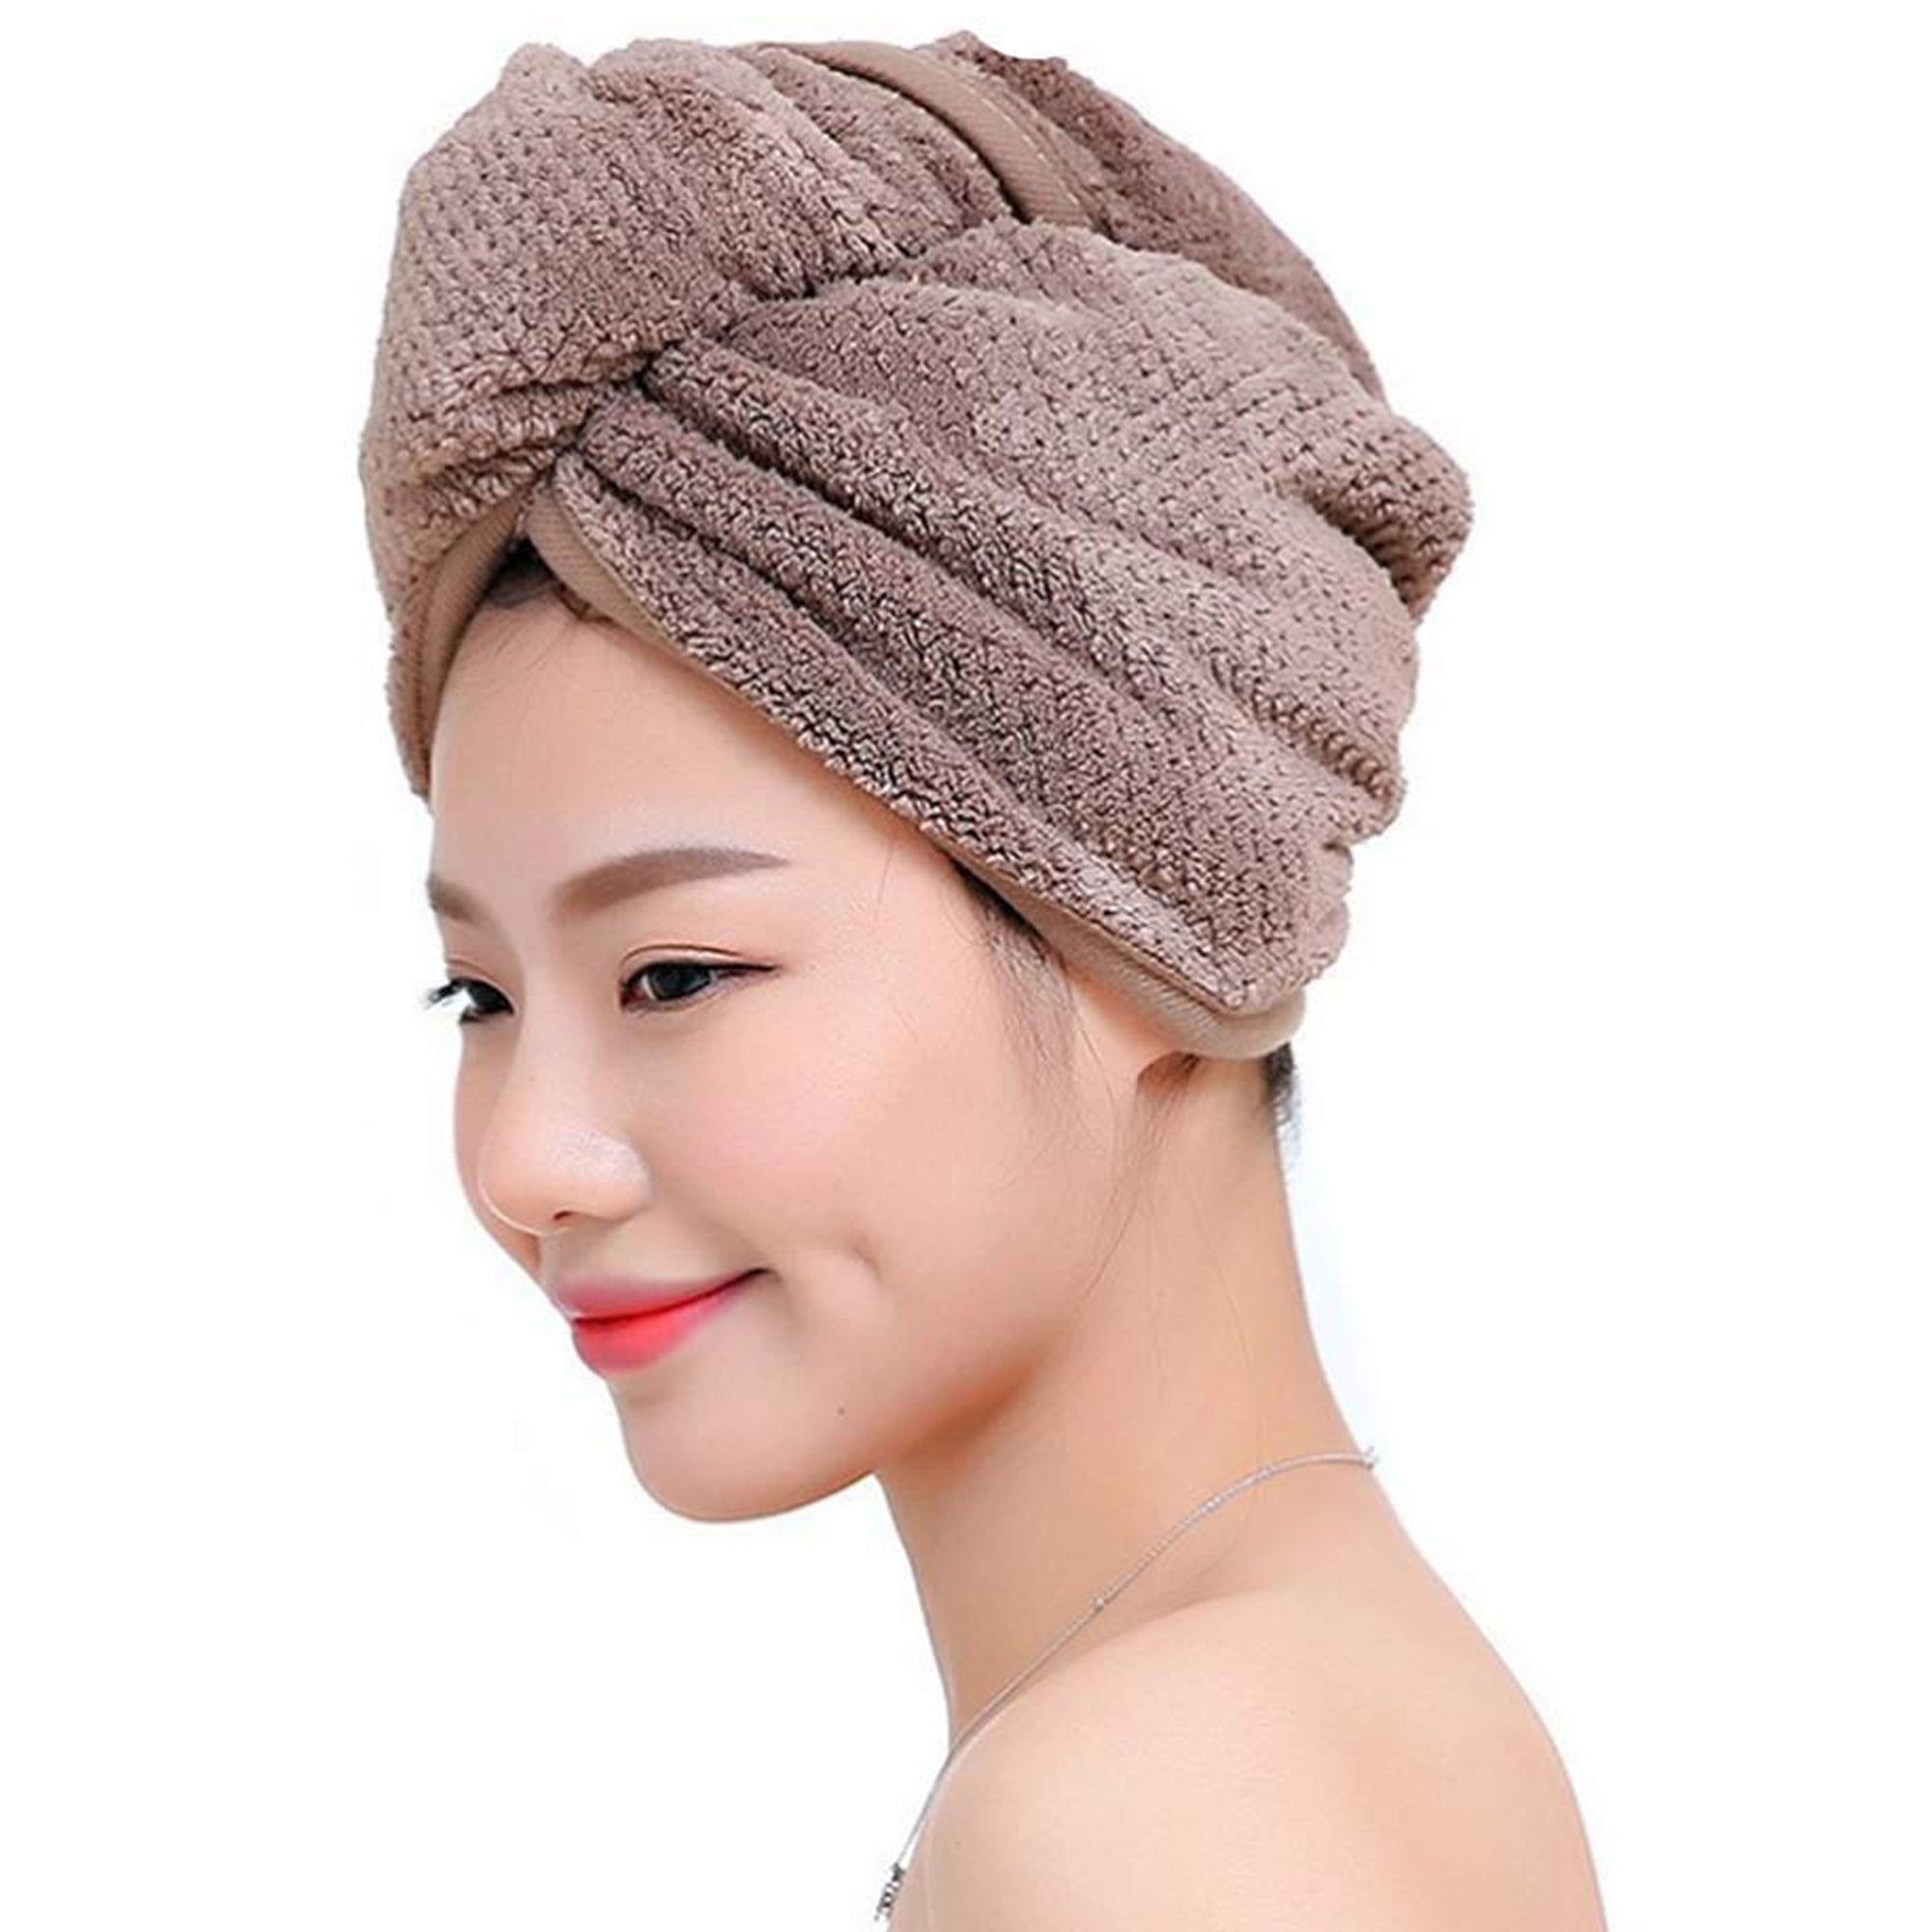 New Microfibre After Shower Hair Drying Wrap Towel Quick Dry Hair Hat Cap Turban 